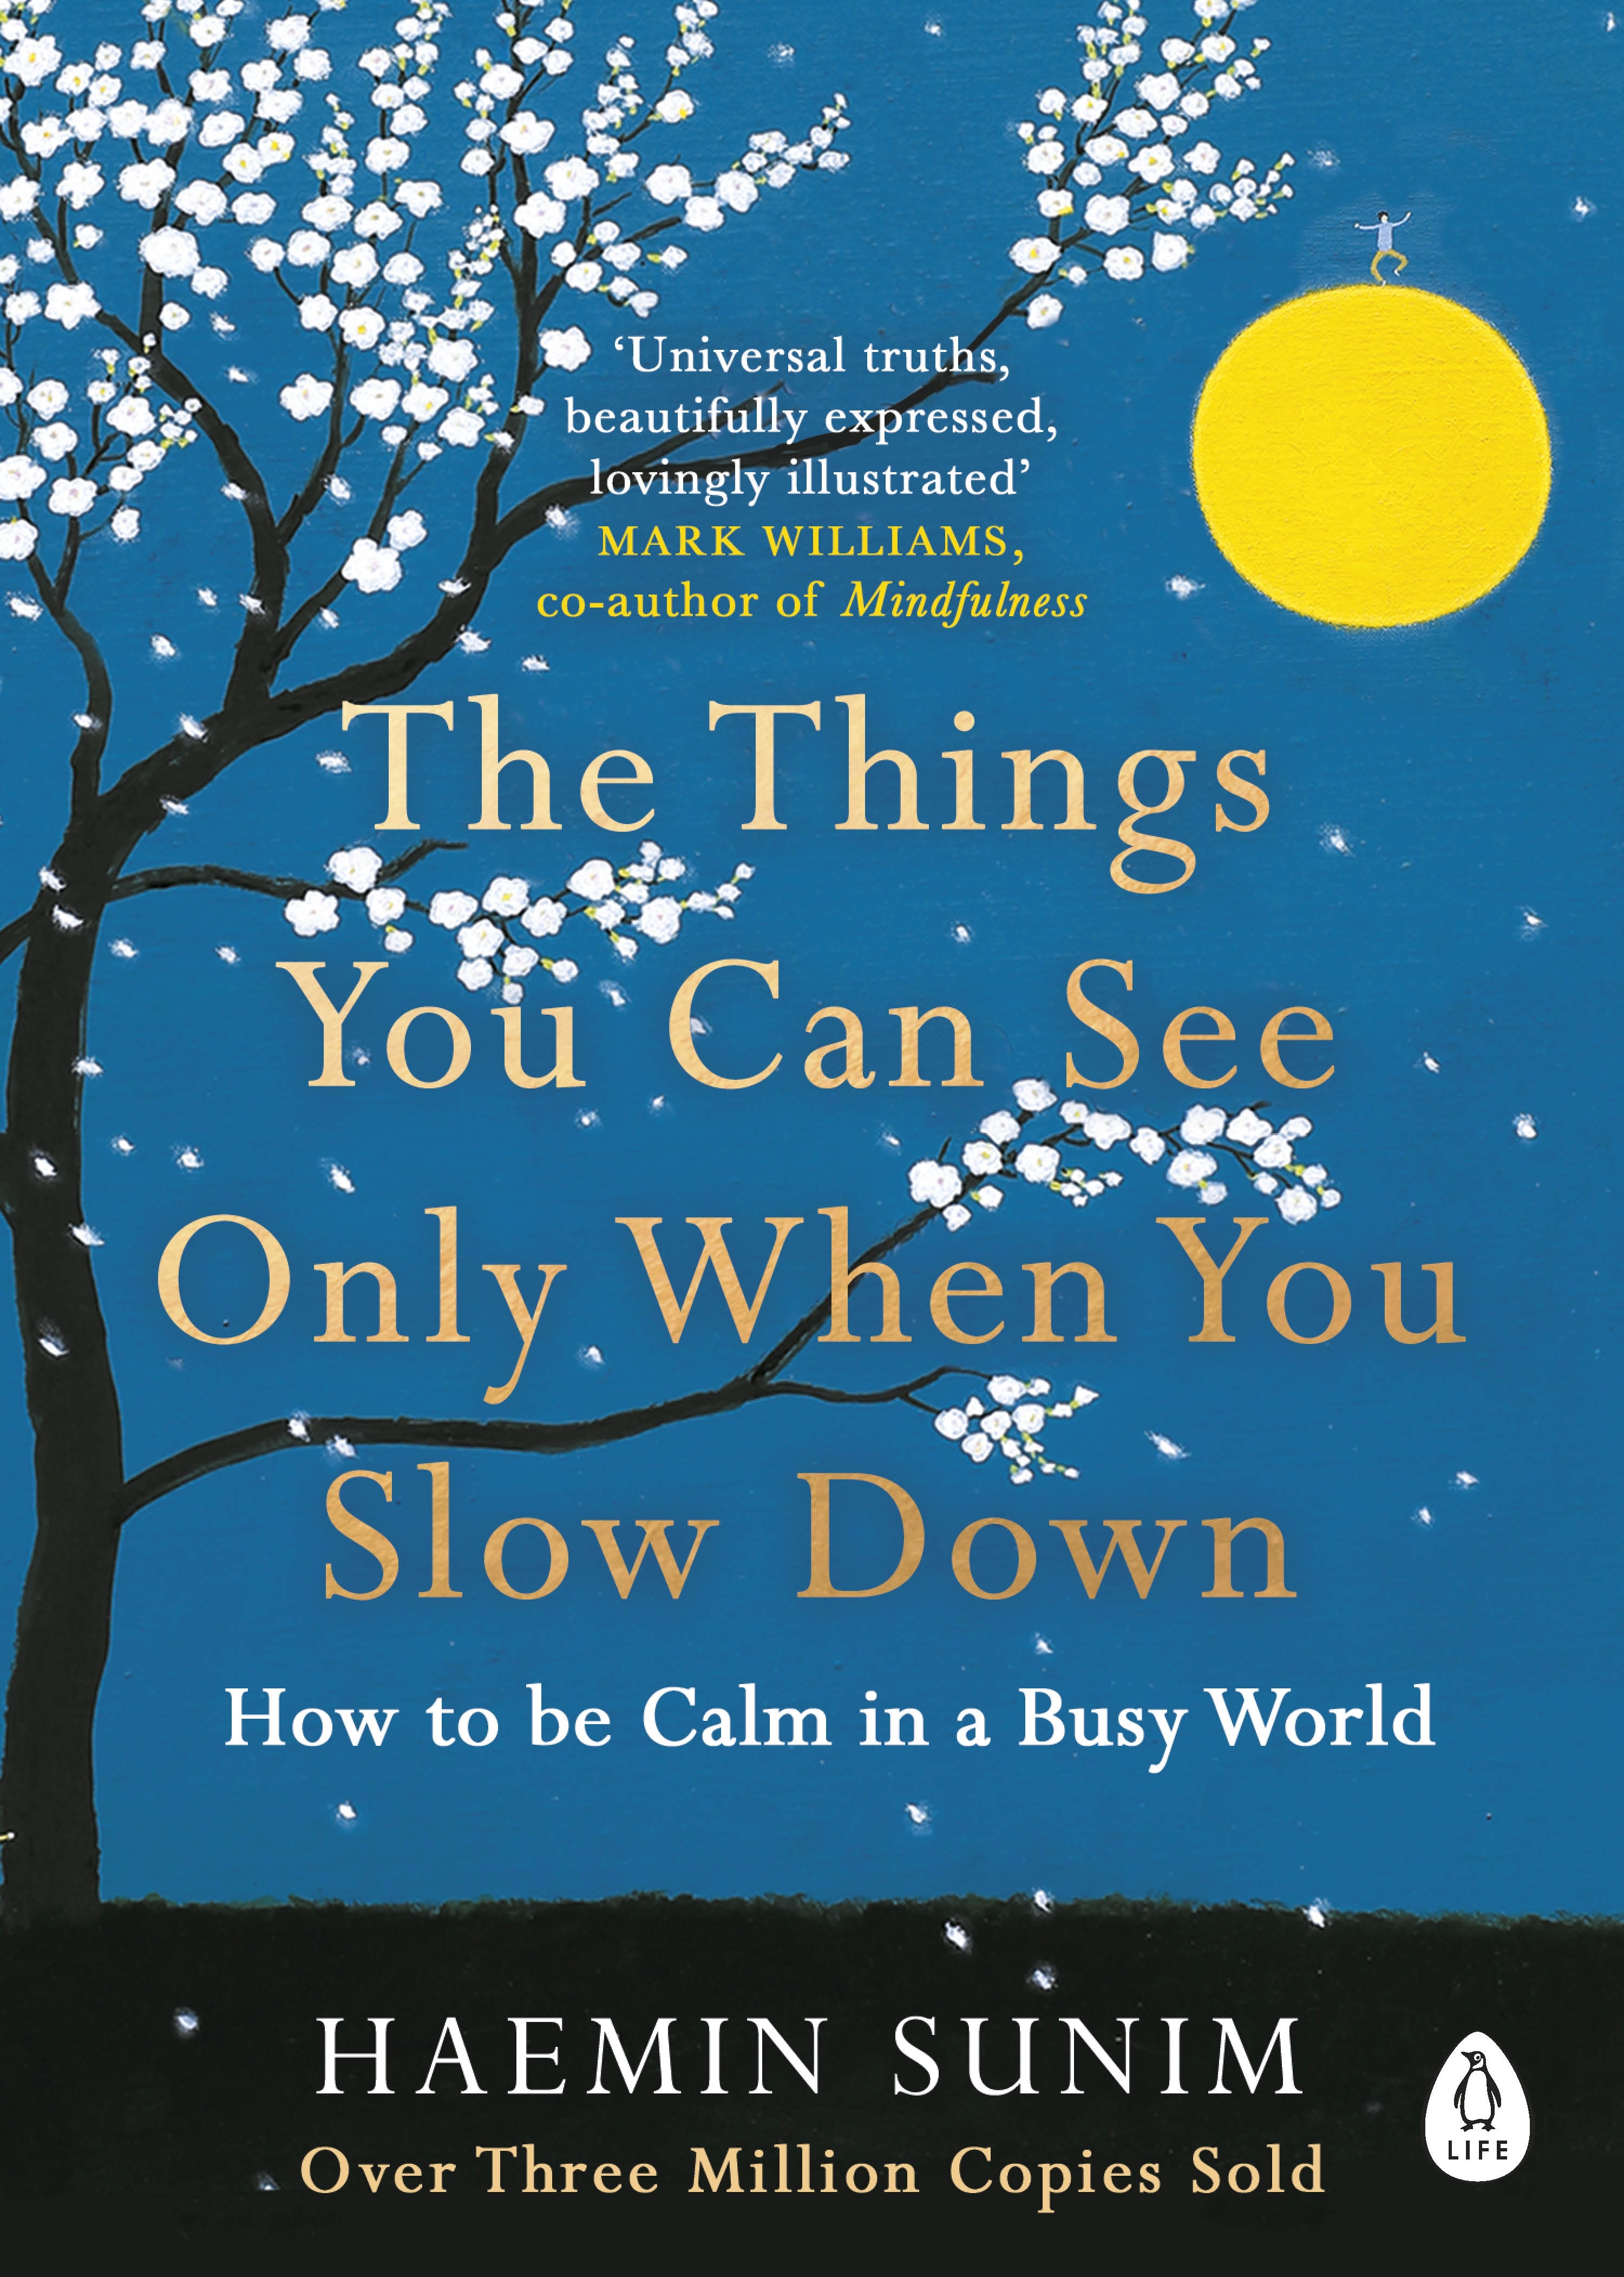 Book “The Things You Can See Only When You Slow Down” by Haemin Sunim